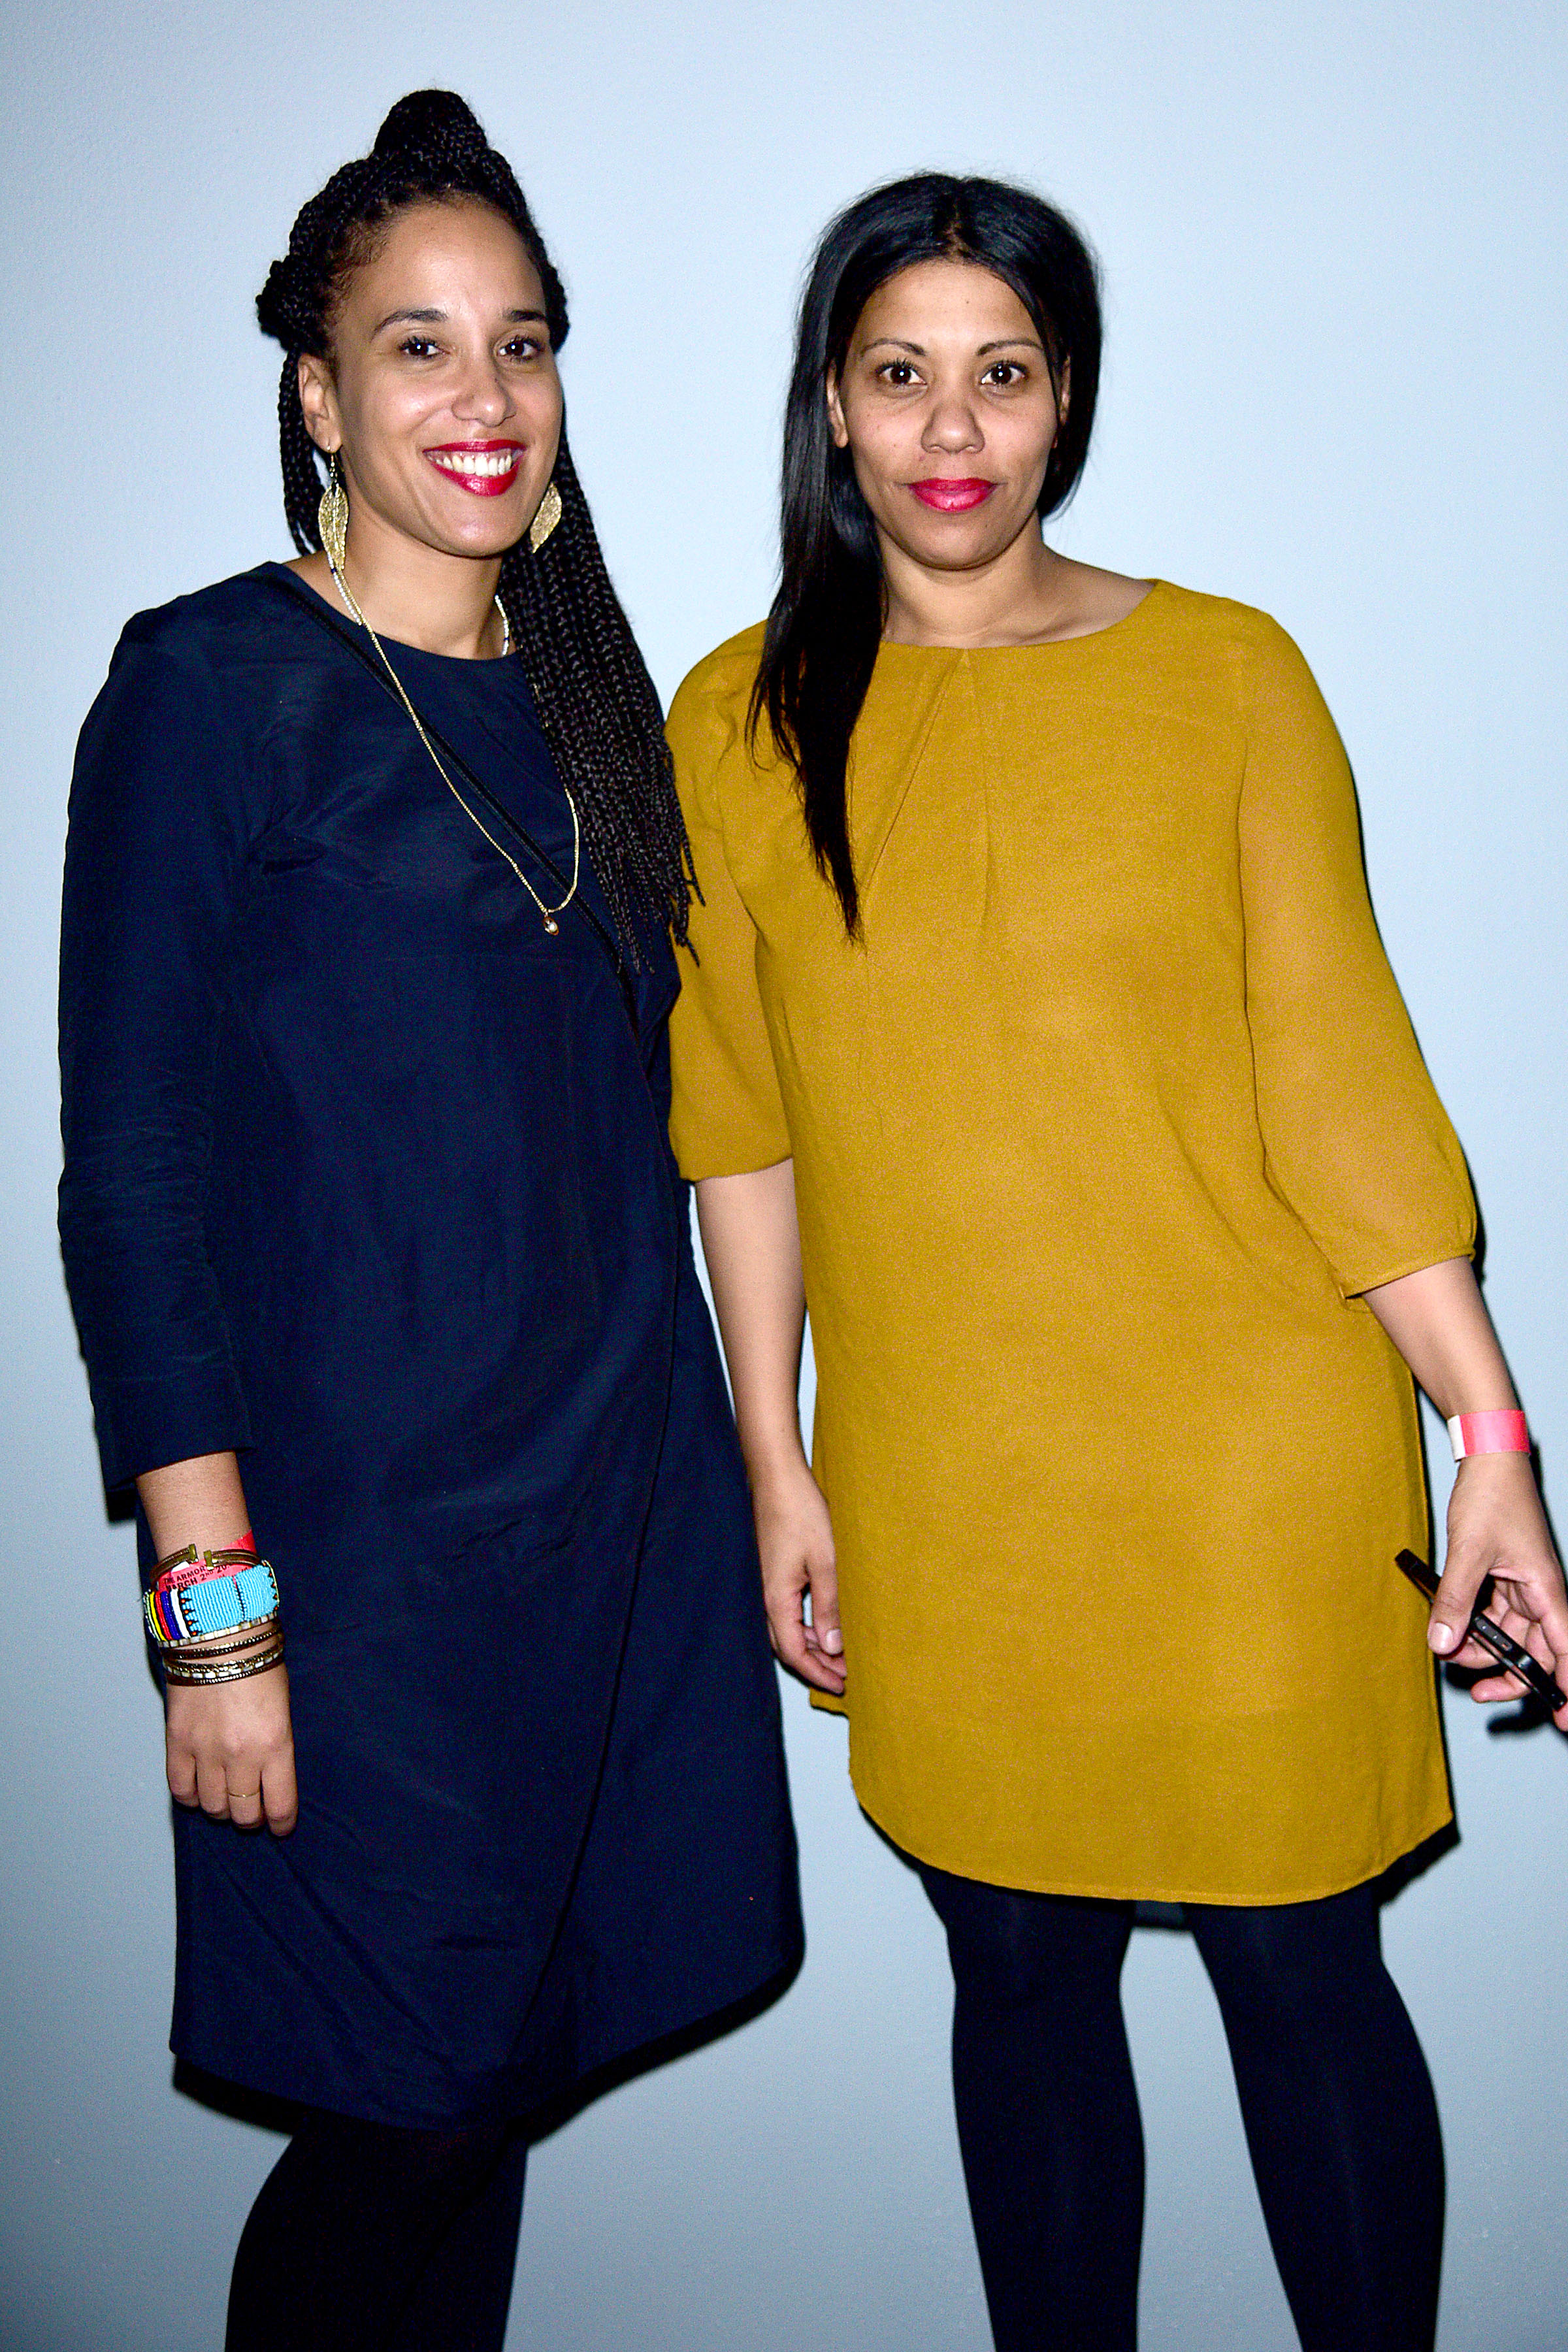 Yvette Mutumba, Julia Drosce at The Armory Party Hosted by The Museum of Modern Art on March 2, 2016. Courtesy of Aurora Rose/Patrick McMullan.